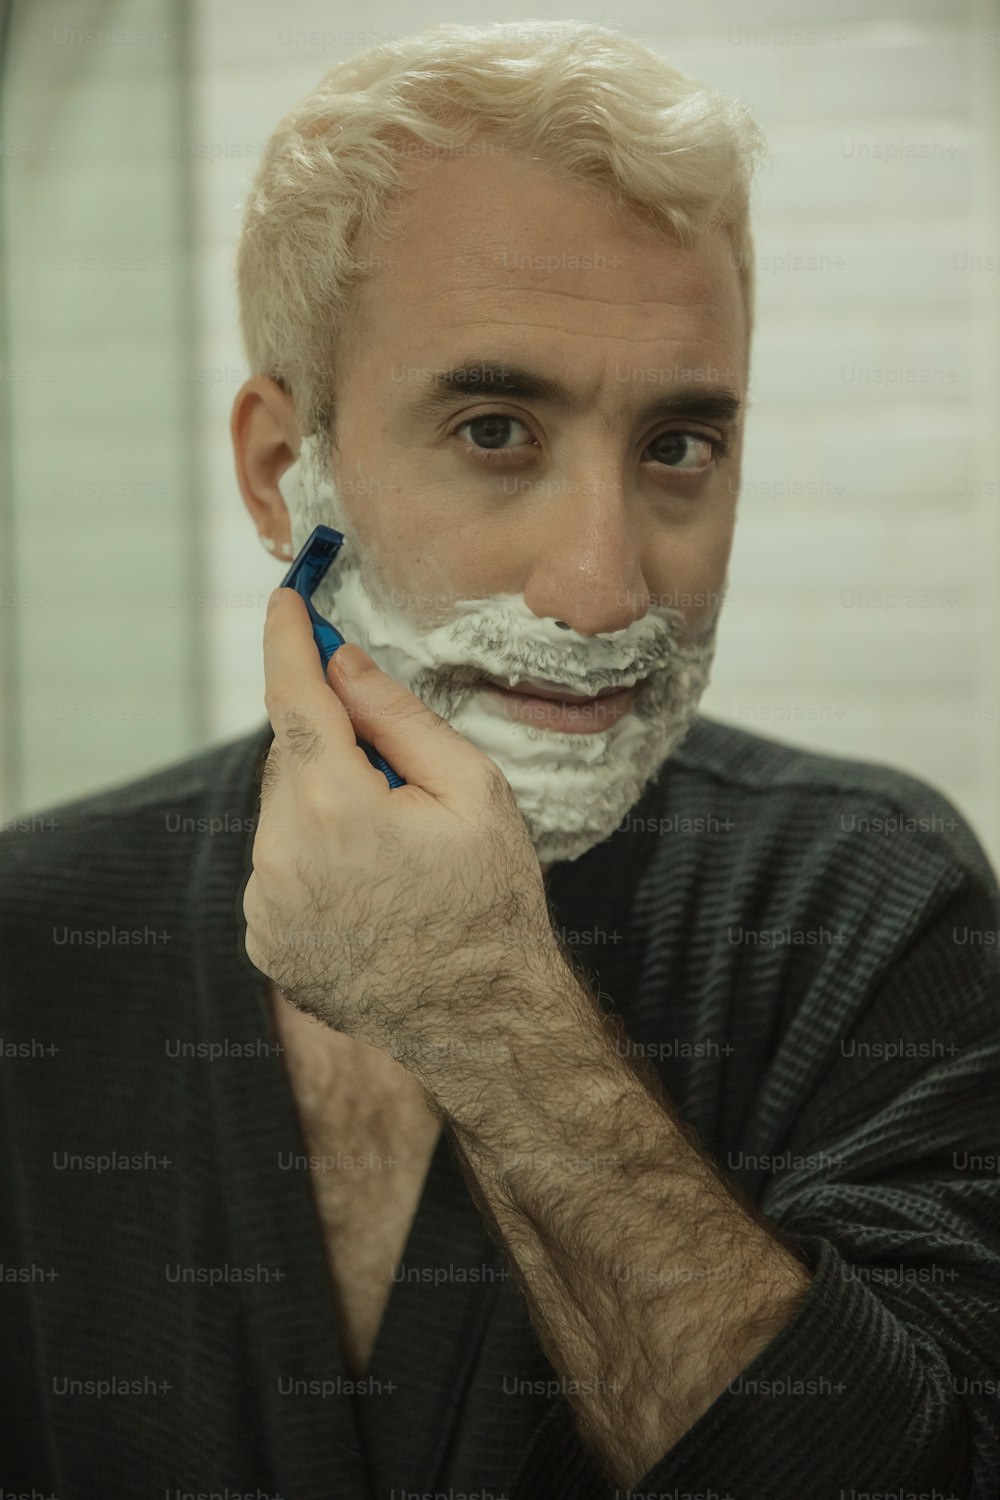 a man shaving his face with a razor